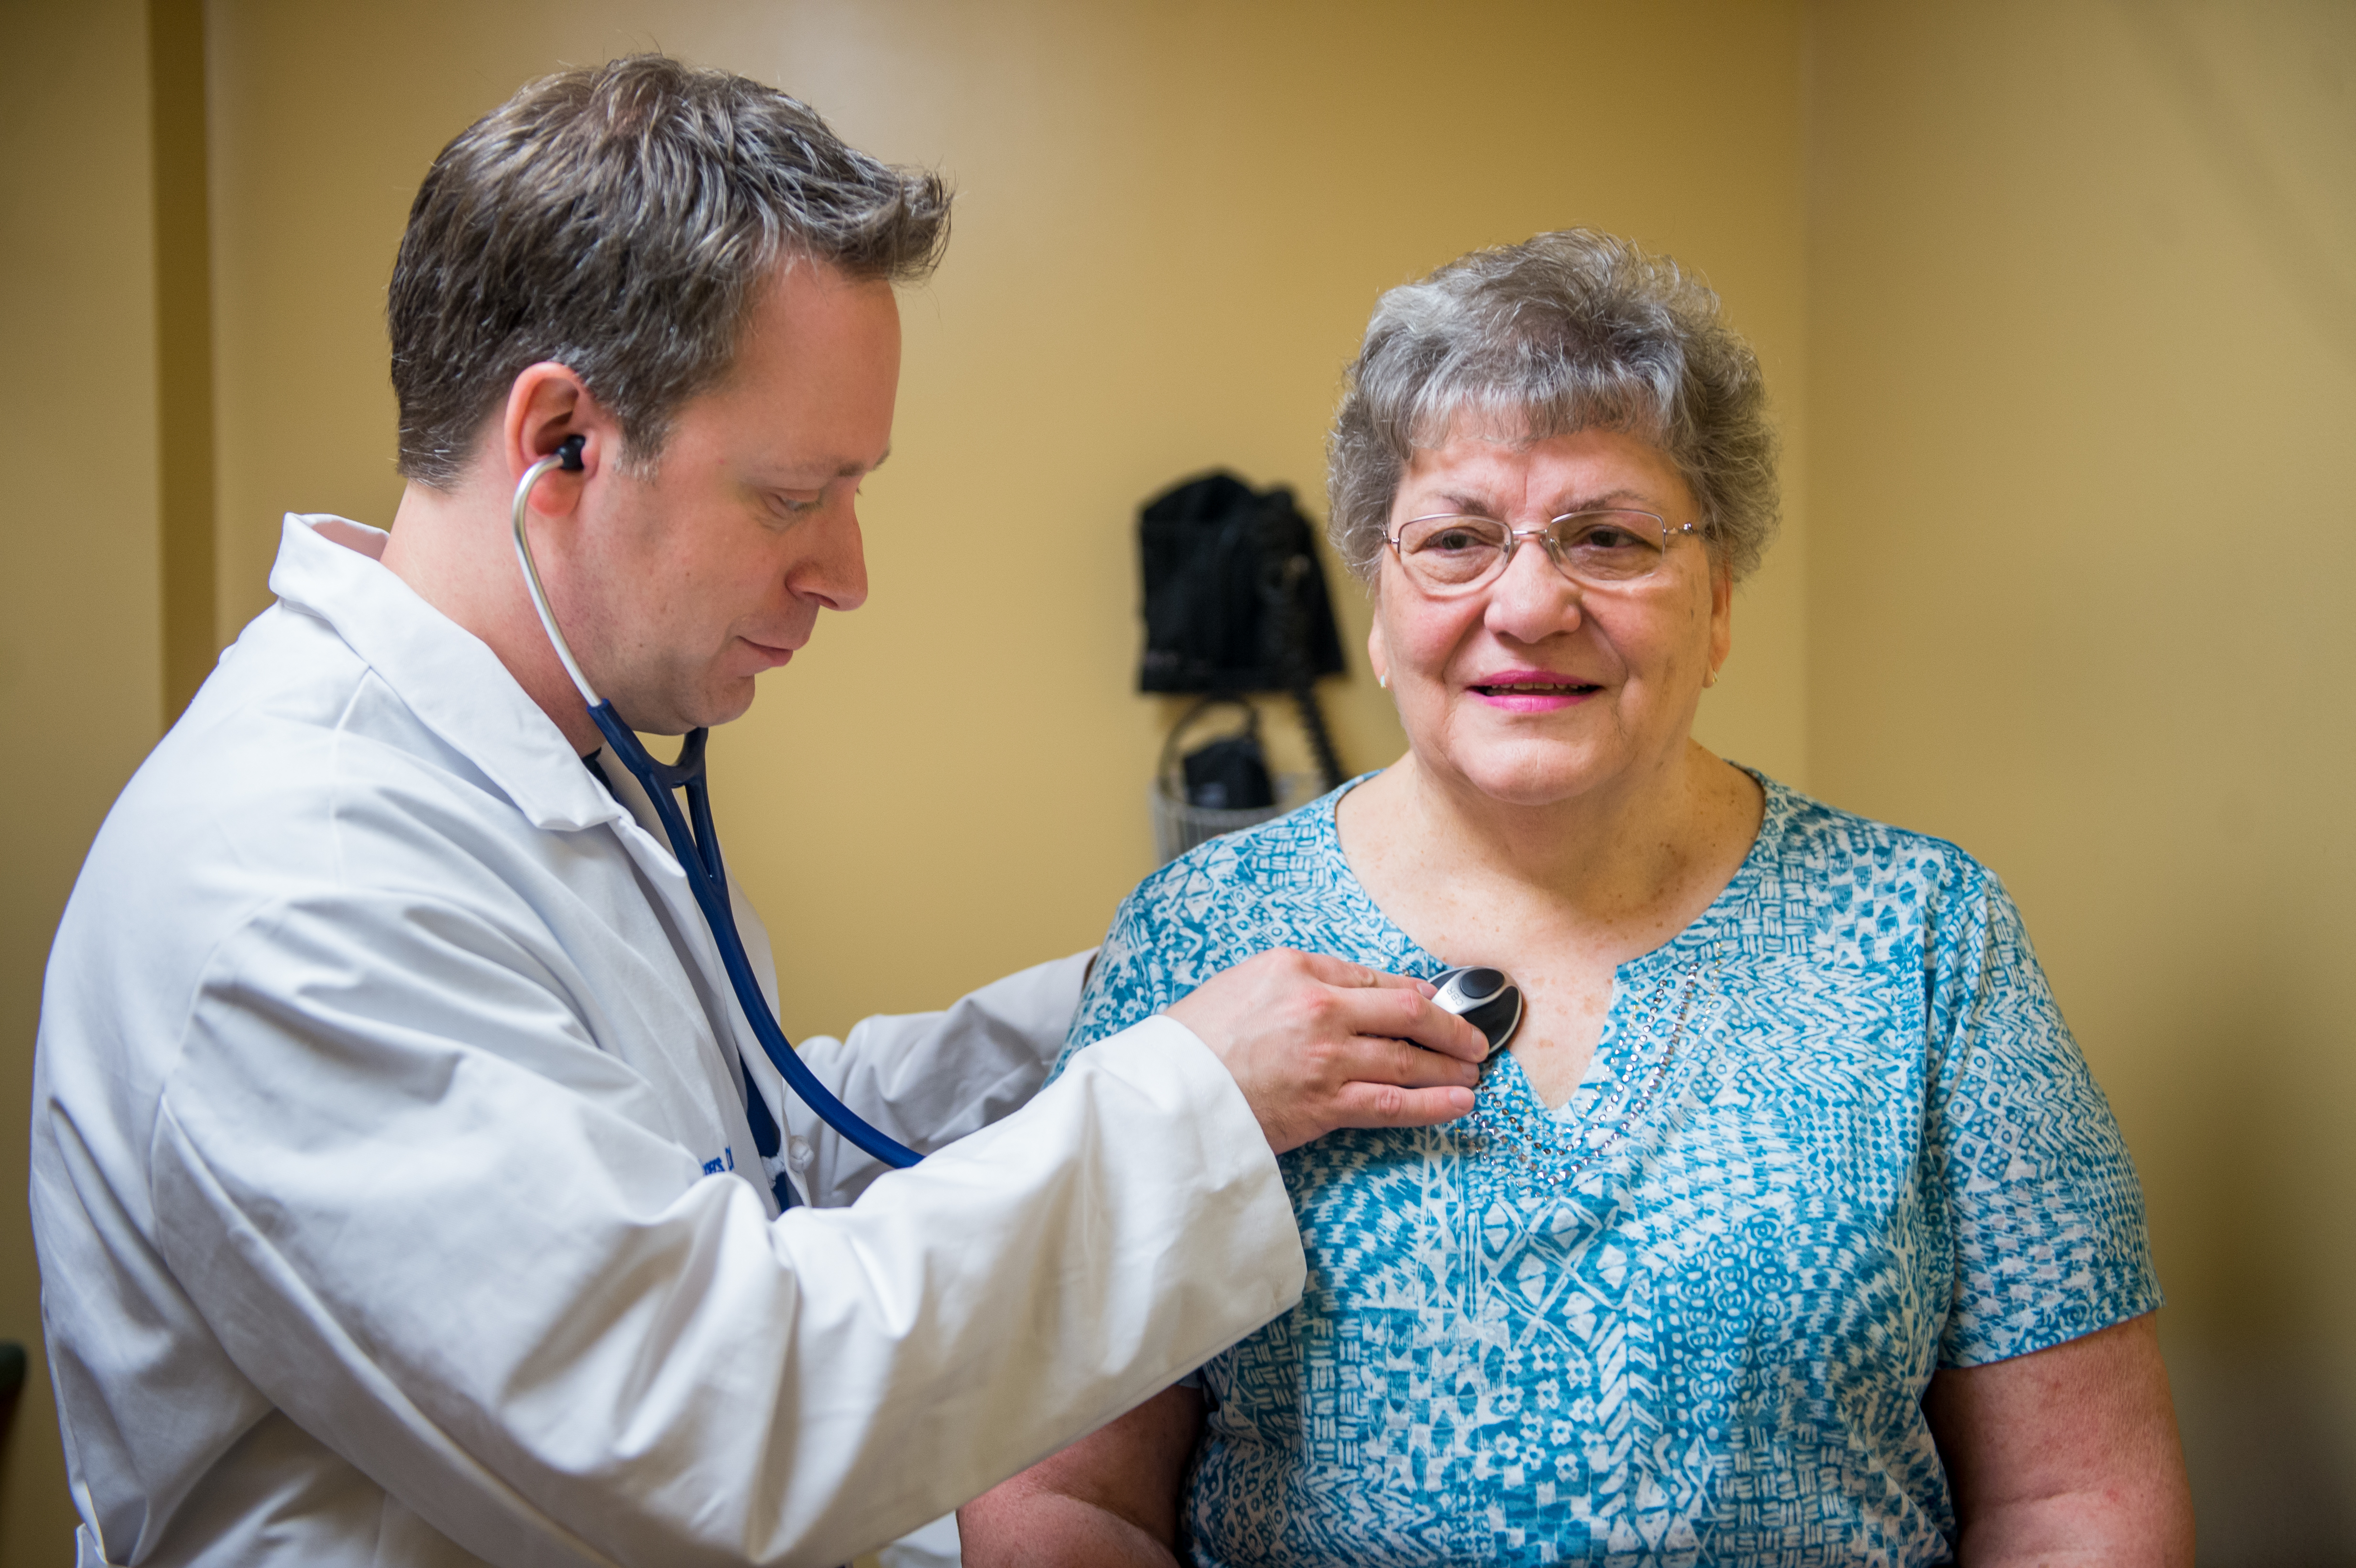 A male physician in a white coat uses a stethoscope to examine a female patient. Small medical equipment is mounted to a wall in the background.